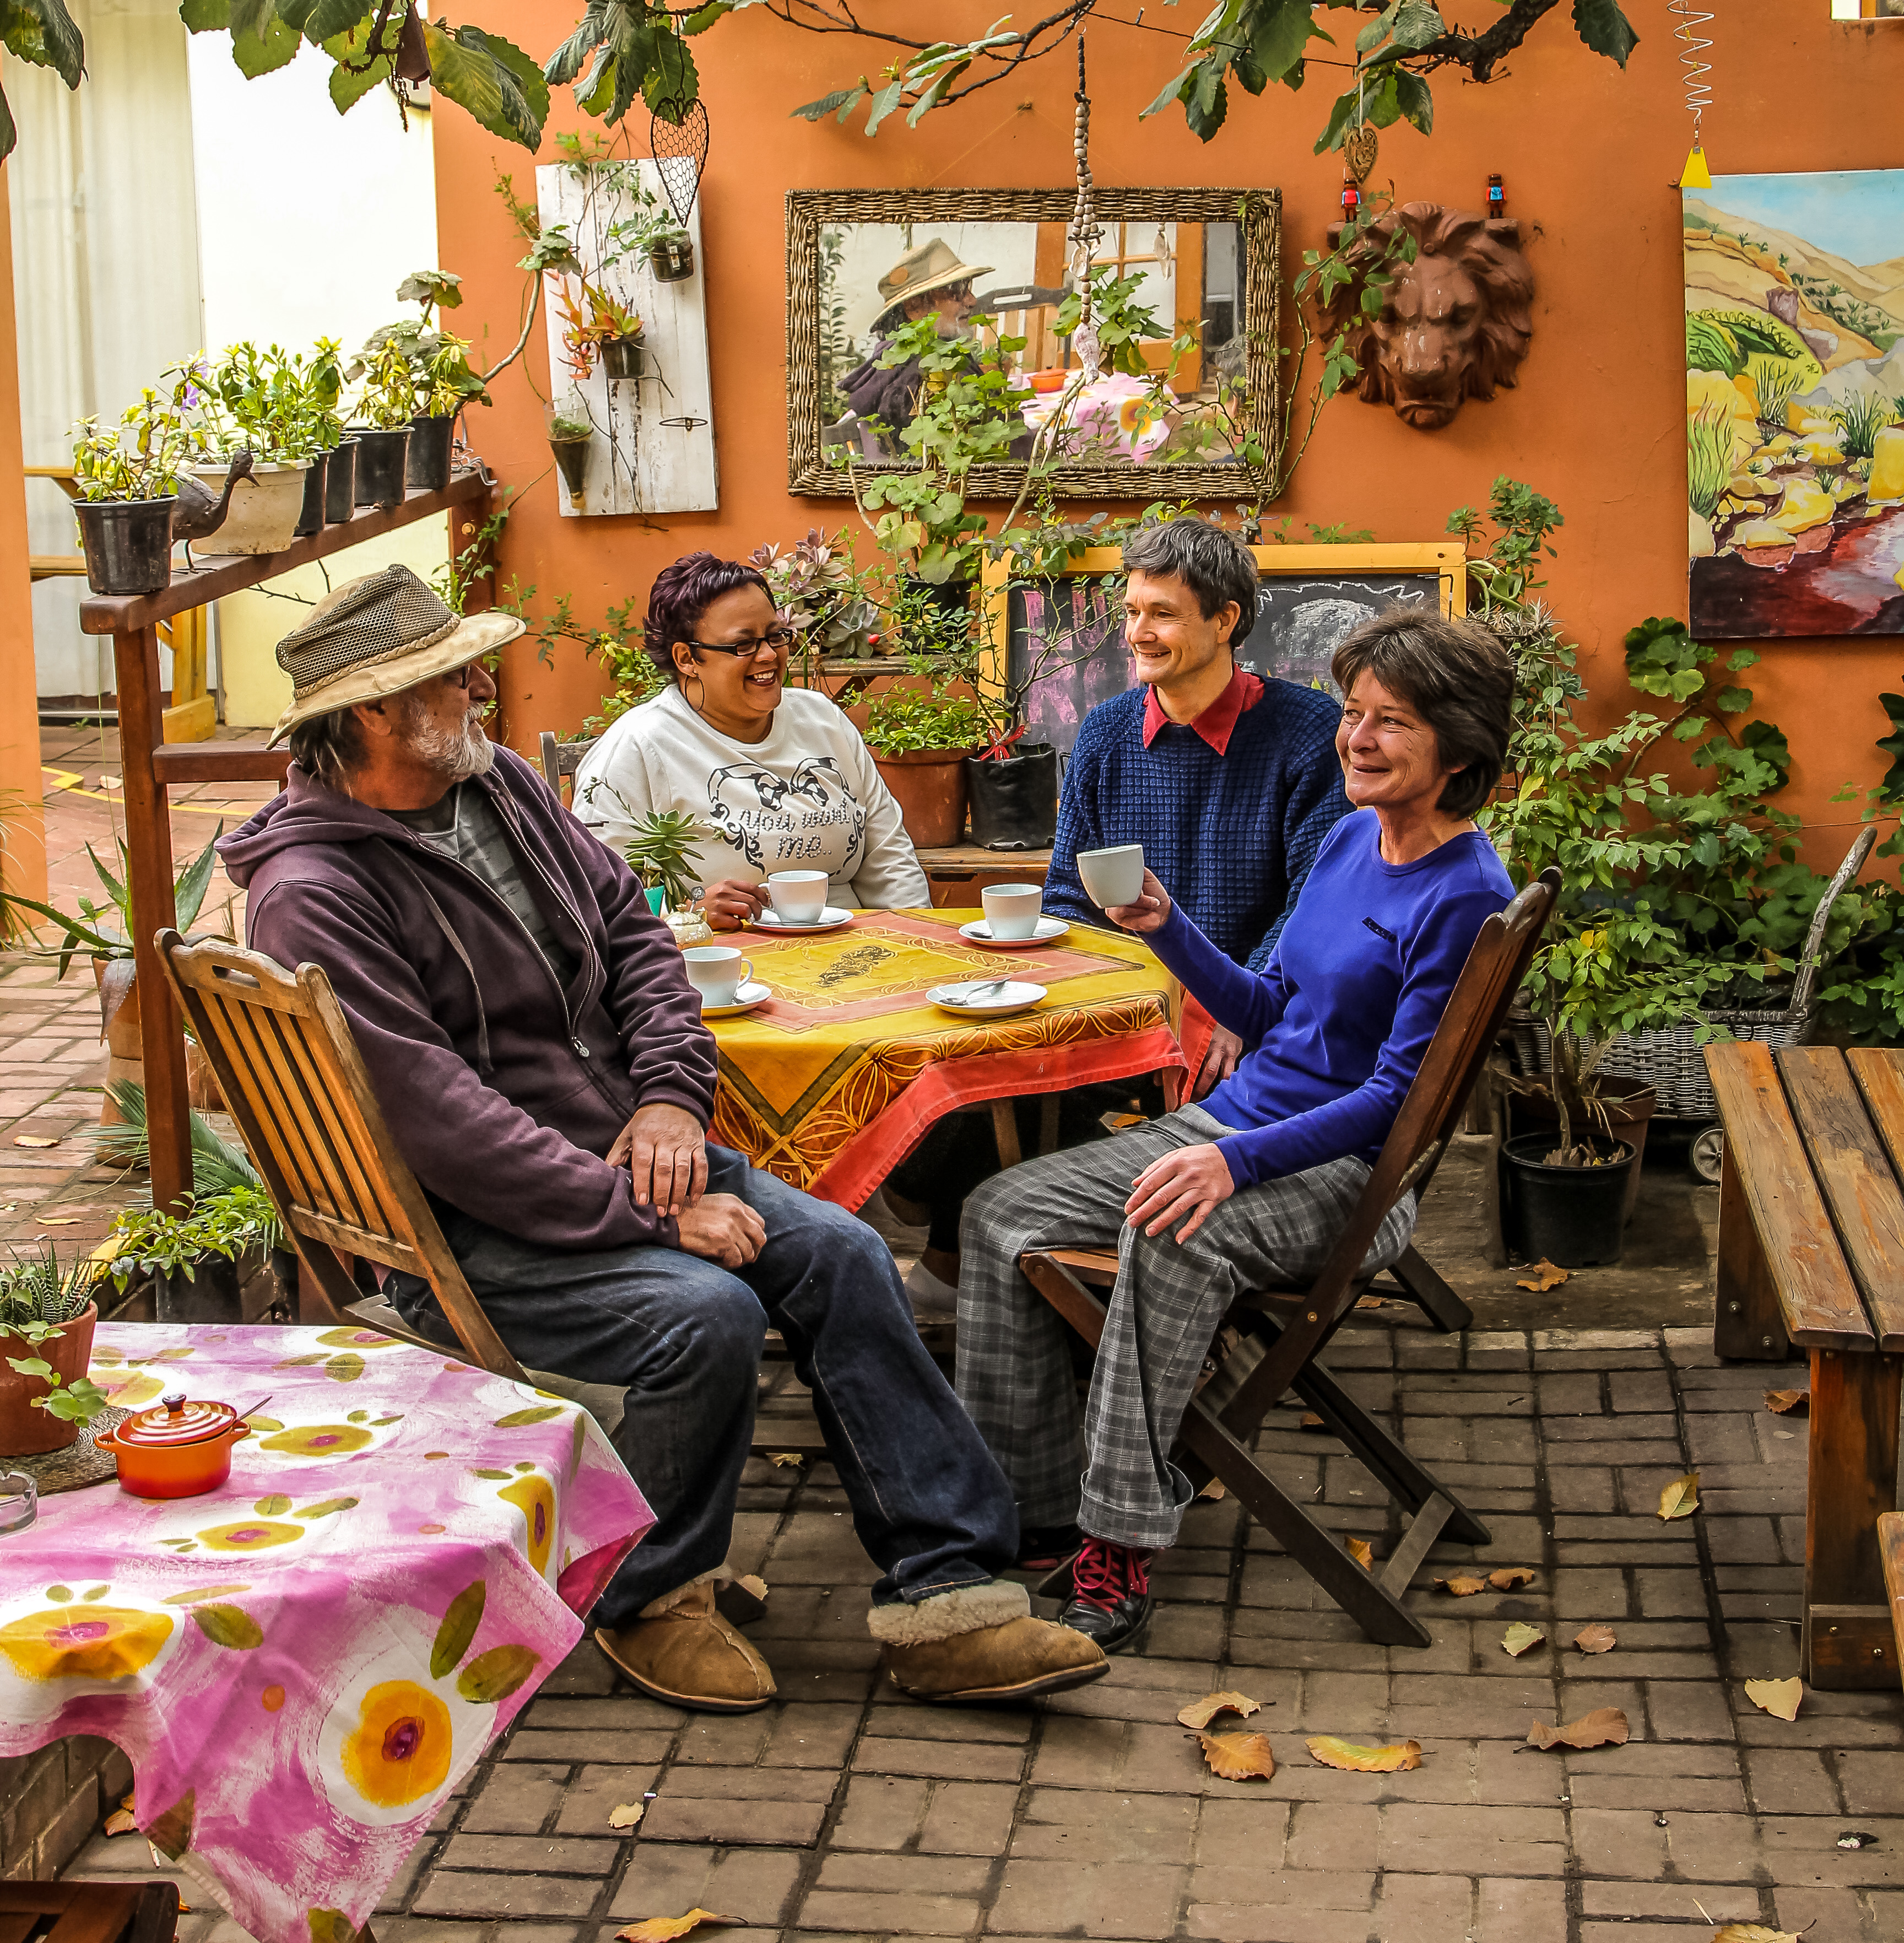 Barrydale, Western Cape: Coffee with mates at midday – priceless time spent. Image: Chris Marais